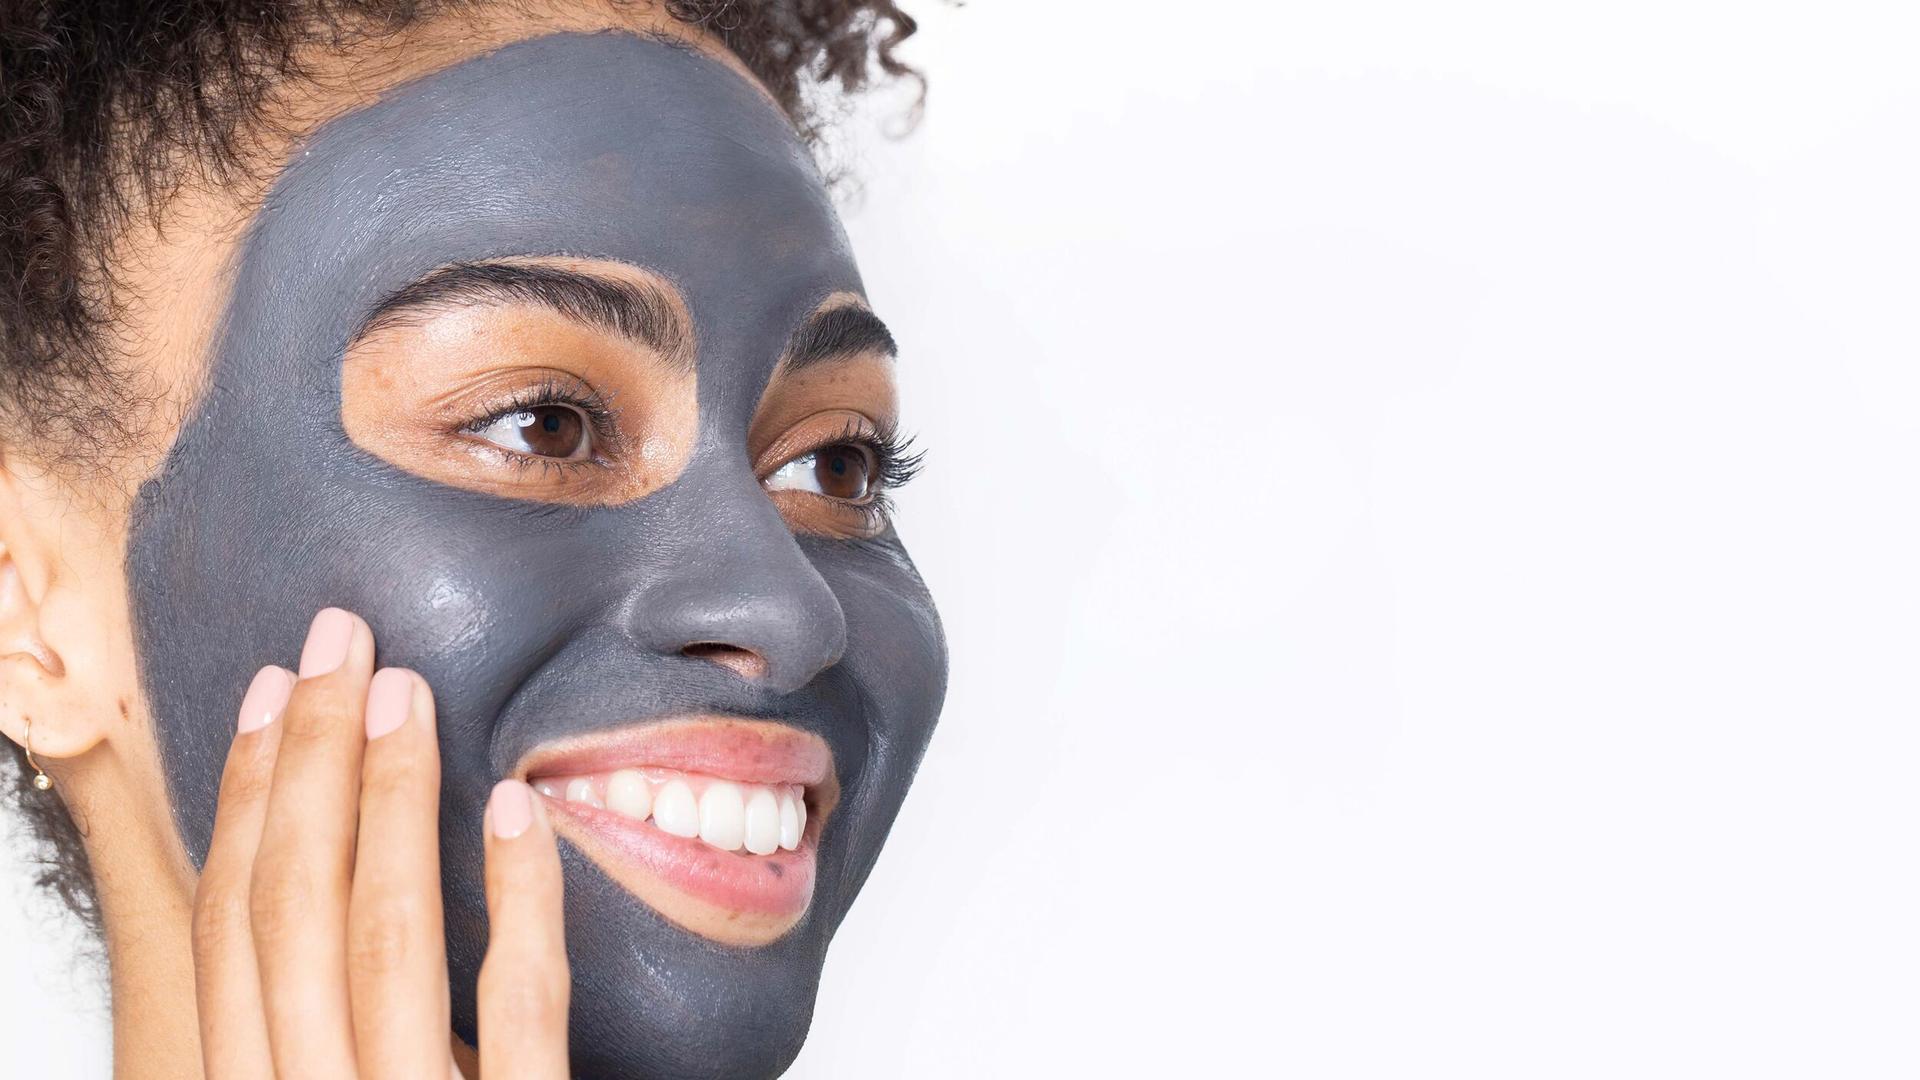 The Best Face Masks for Your Skin Type